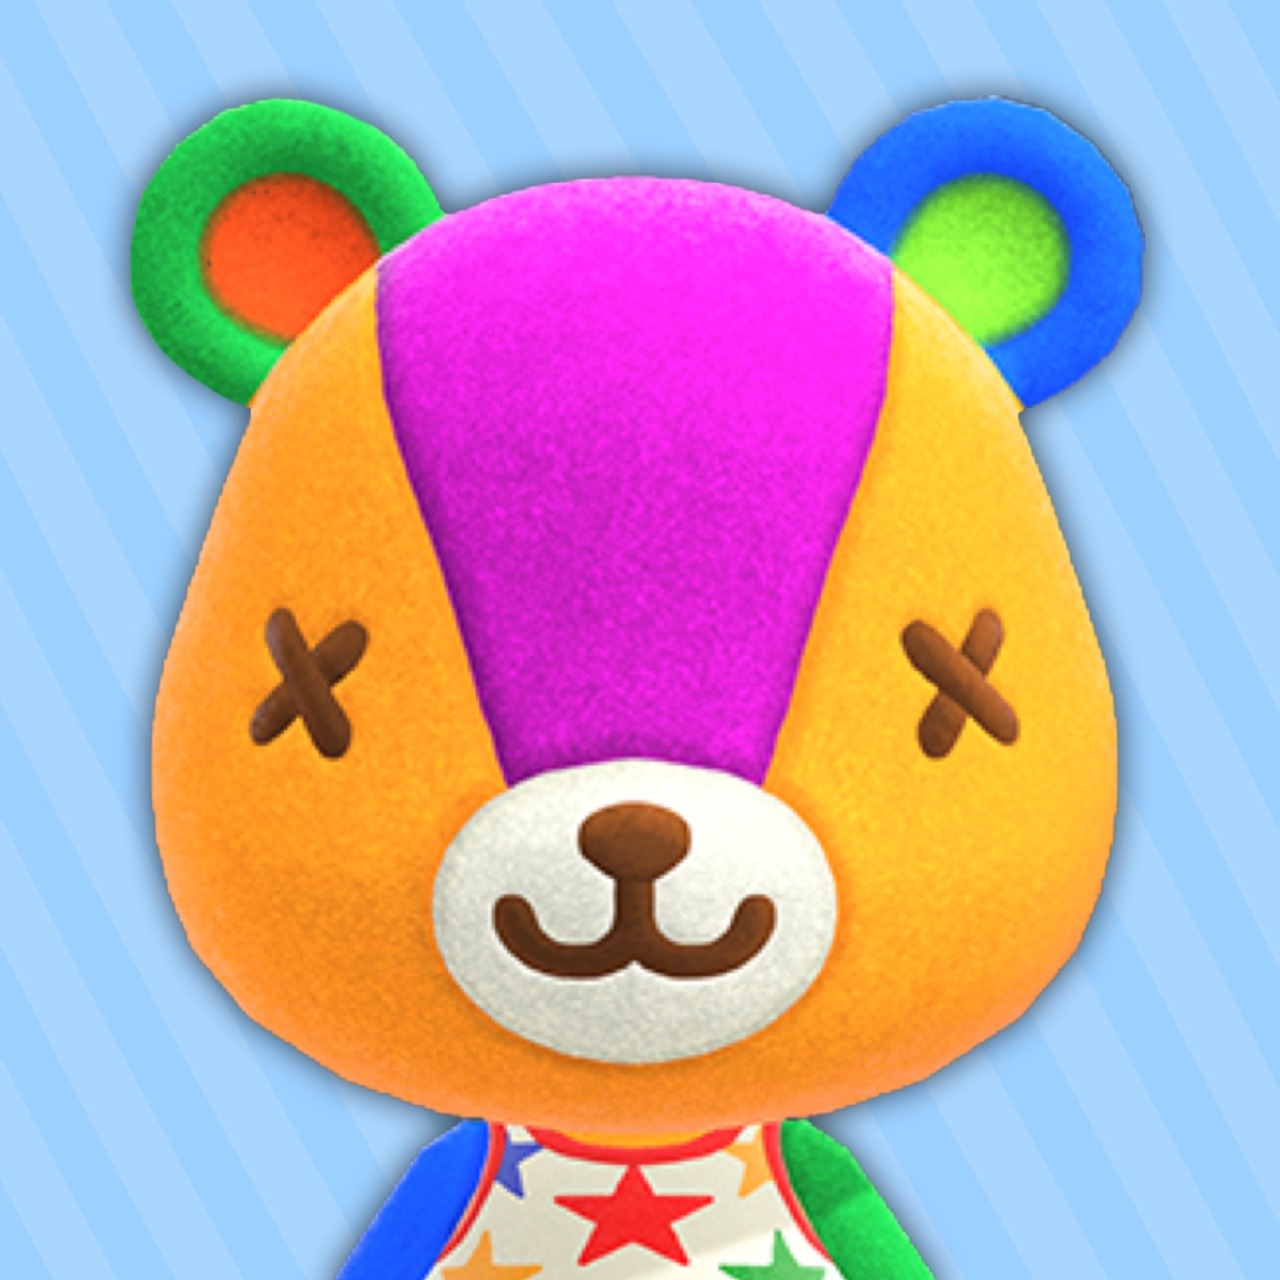 Image of Stitches from the 'Animal Crossing' games.